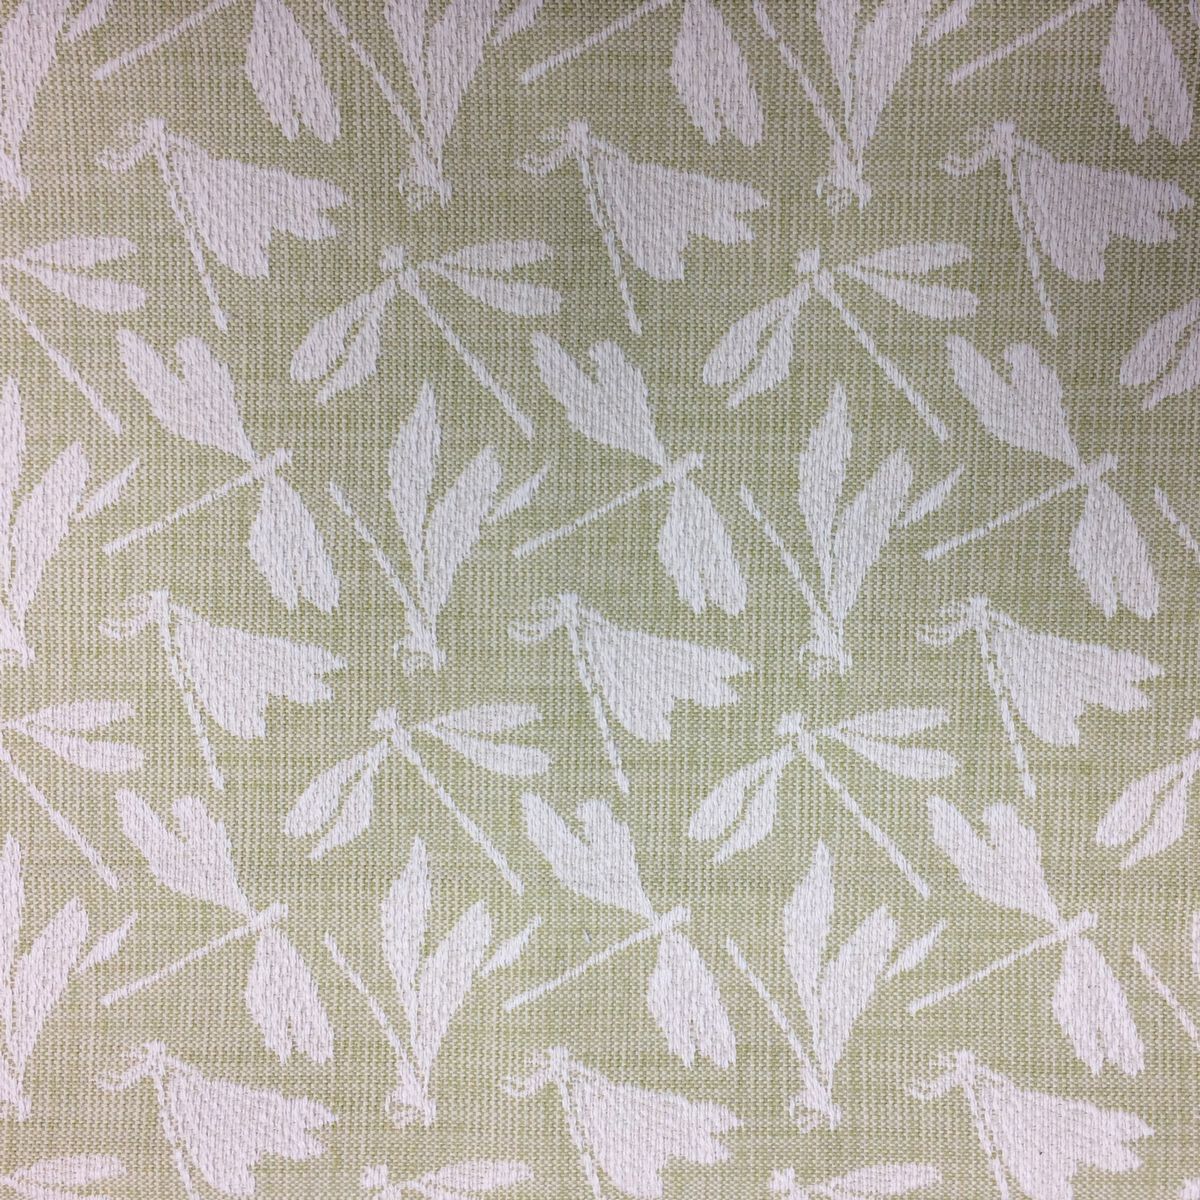 Meddon Meadow Fabric by Voyage Maison